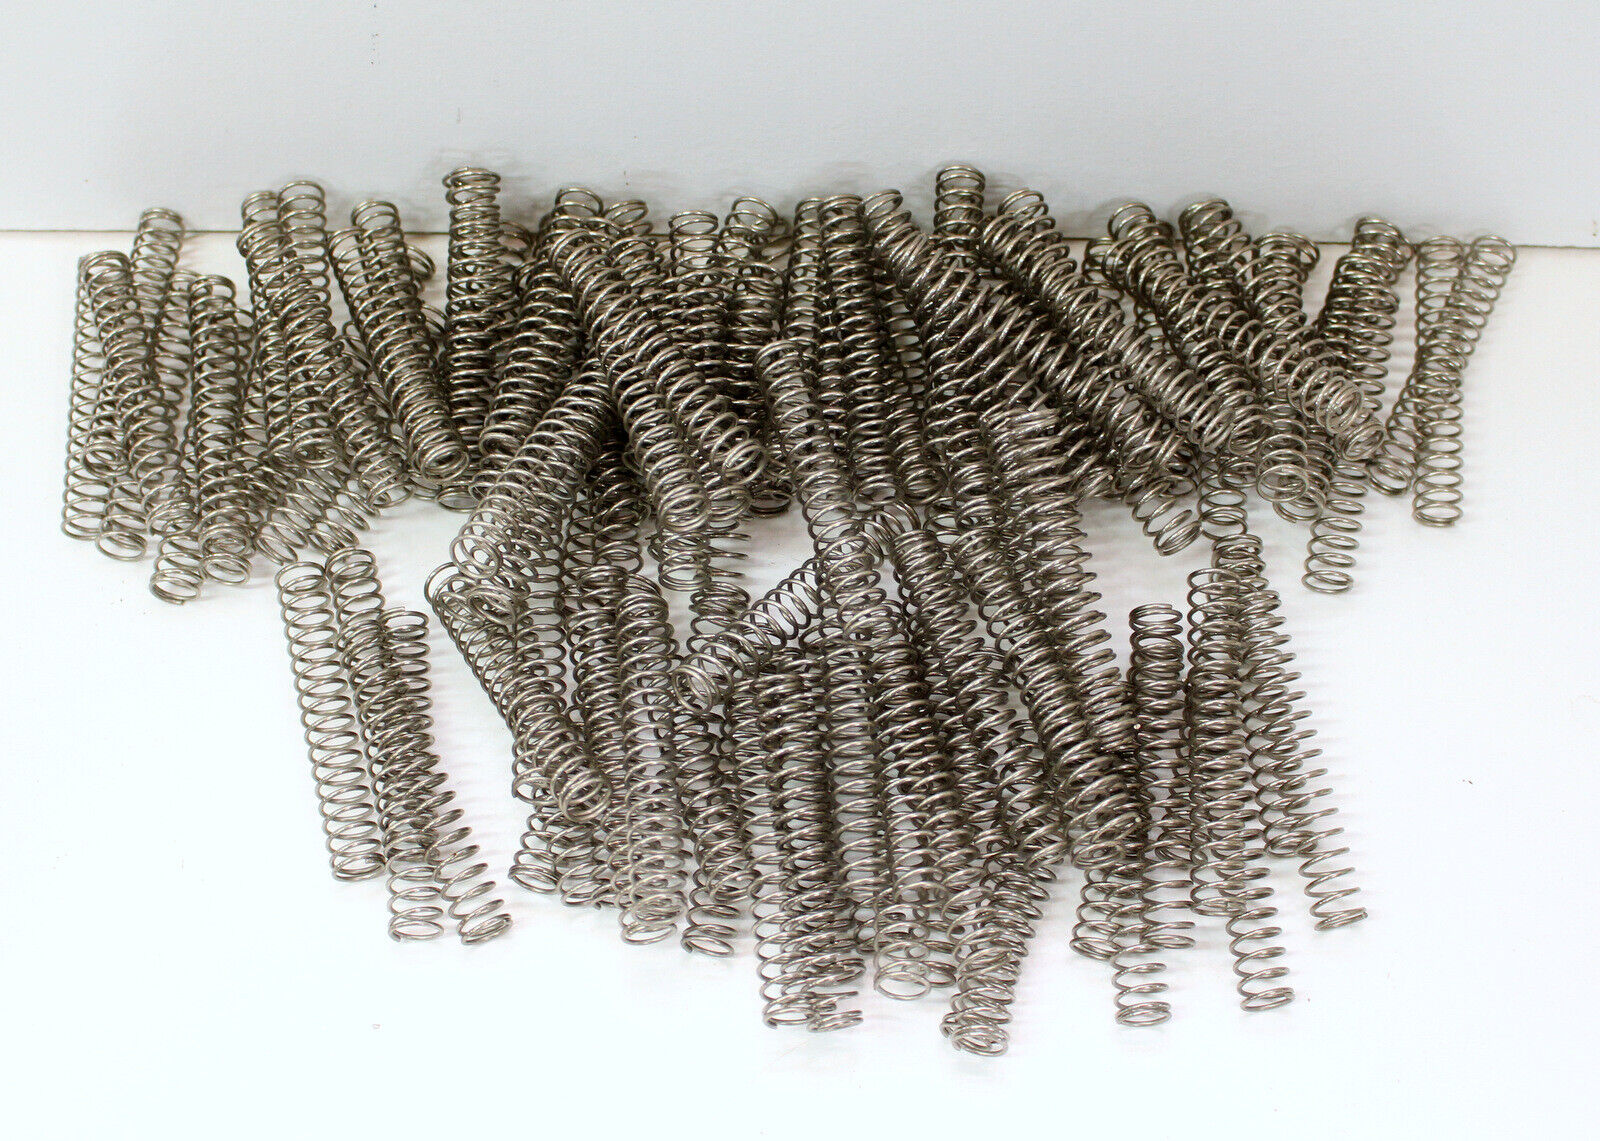 Lot of 120 Spring Coils  ~  3 1/2"  ~  Silver Metal Steampunk Industrial Art Без бренда